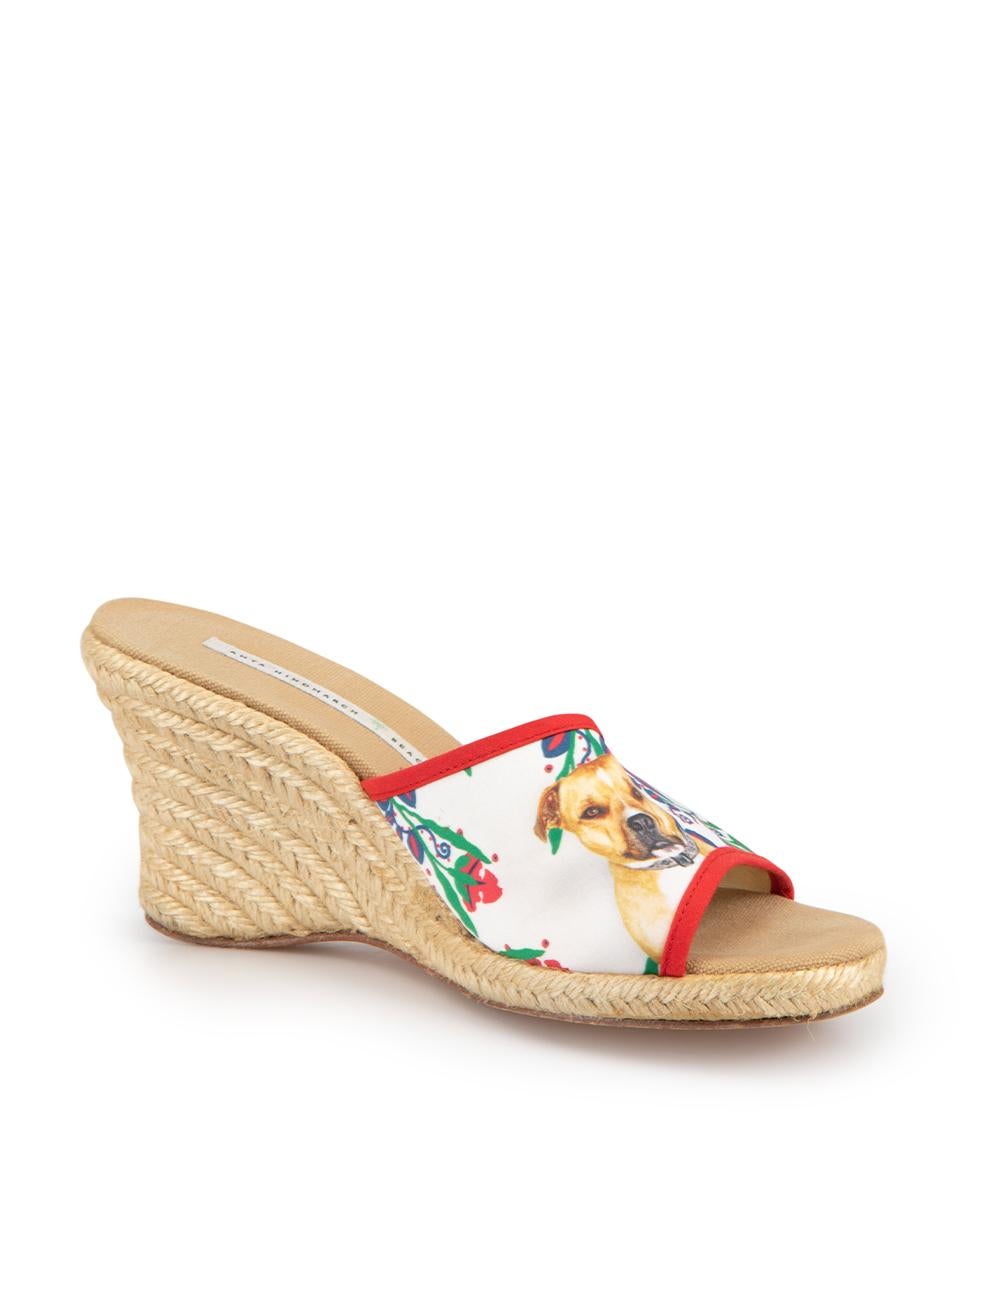 CONDITION is Very good. Minimal wear to sandals is evident. Minor fading to inner sole and scuffing to outer sole on this used Anya Hindmarch designer resale item. Original dustbag included.



Details


Multicoloured 

Cloth

Espadrille wedges

Dog